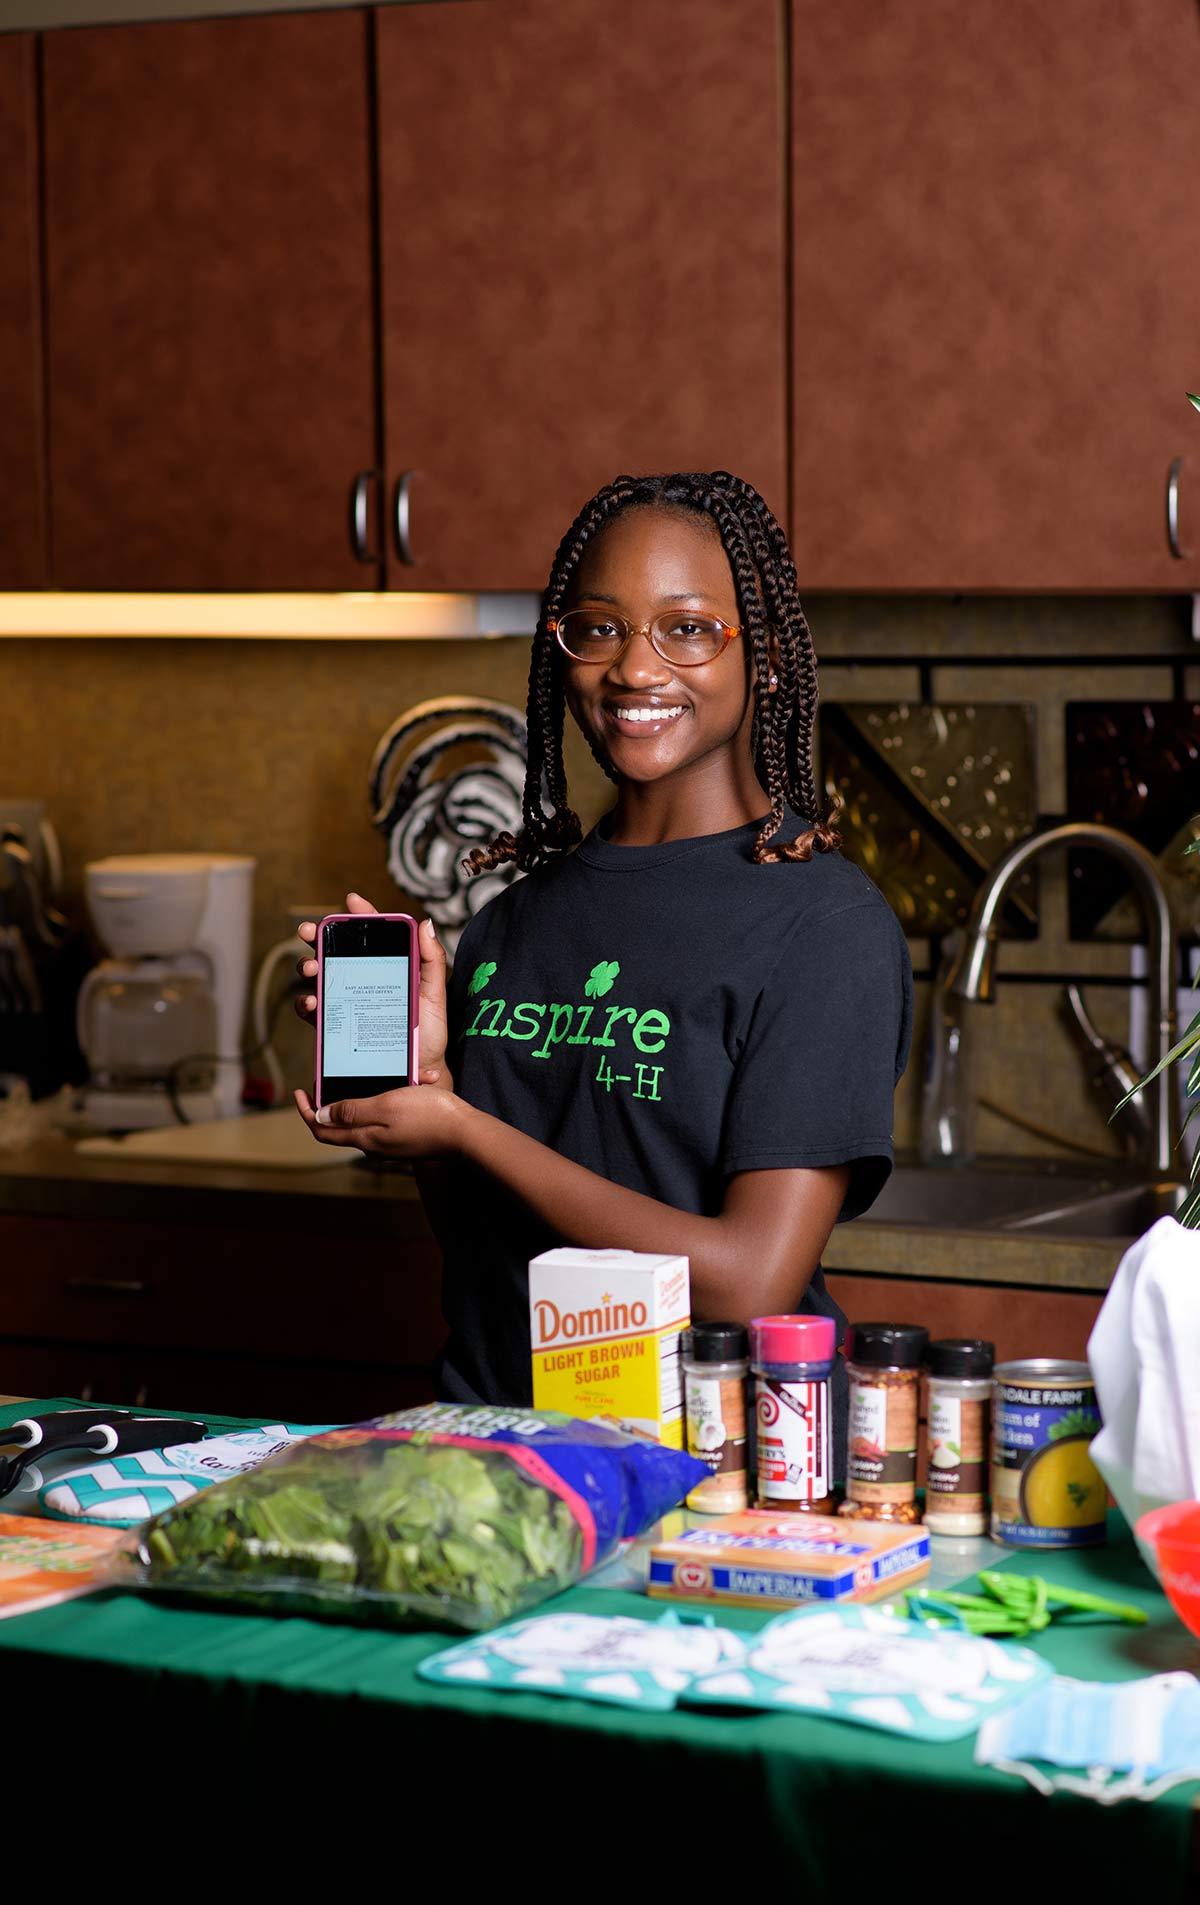 A smiling teenage girl stands behind a table covered in ingredients for a recipe displayed on a phone screen she holds in front of her. 